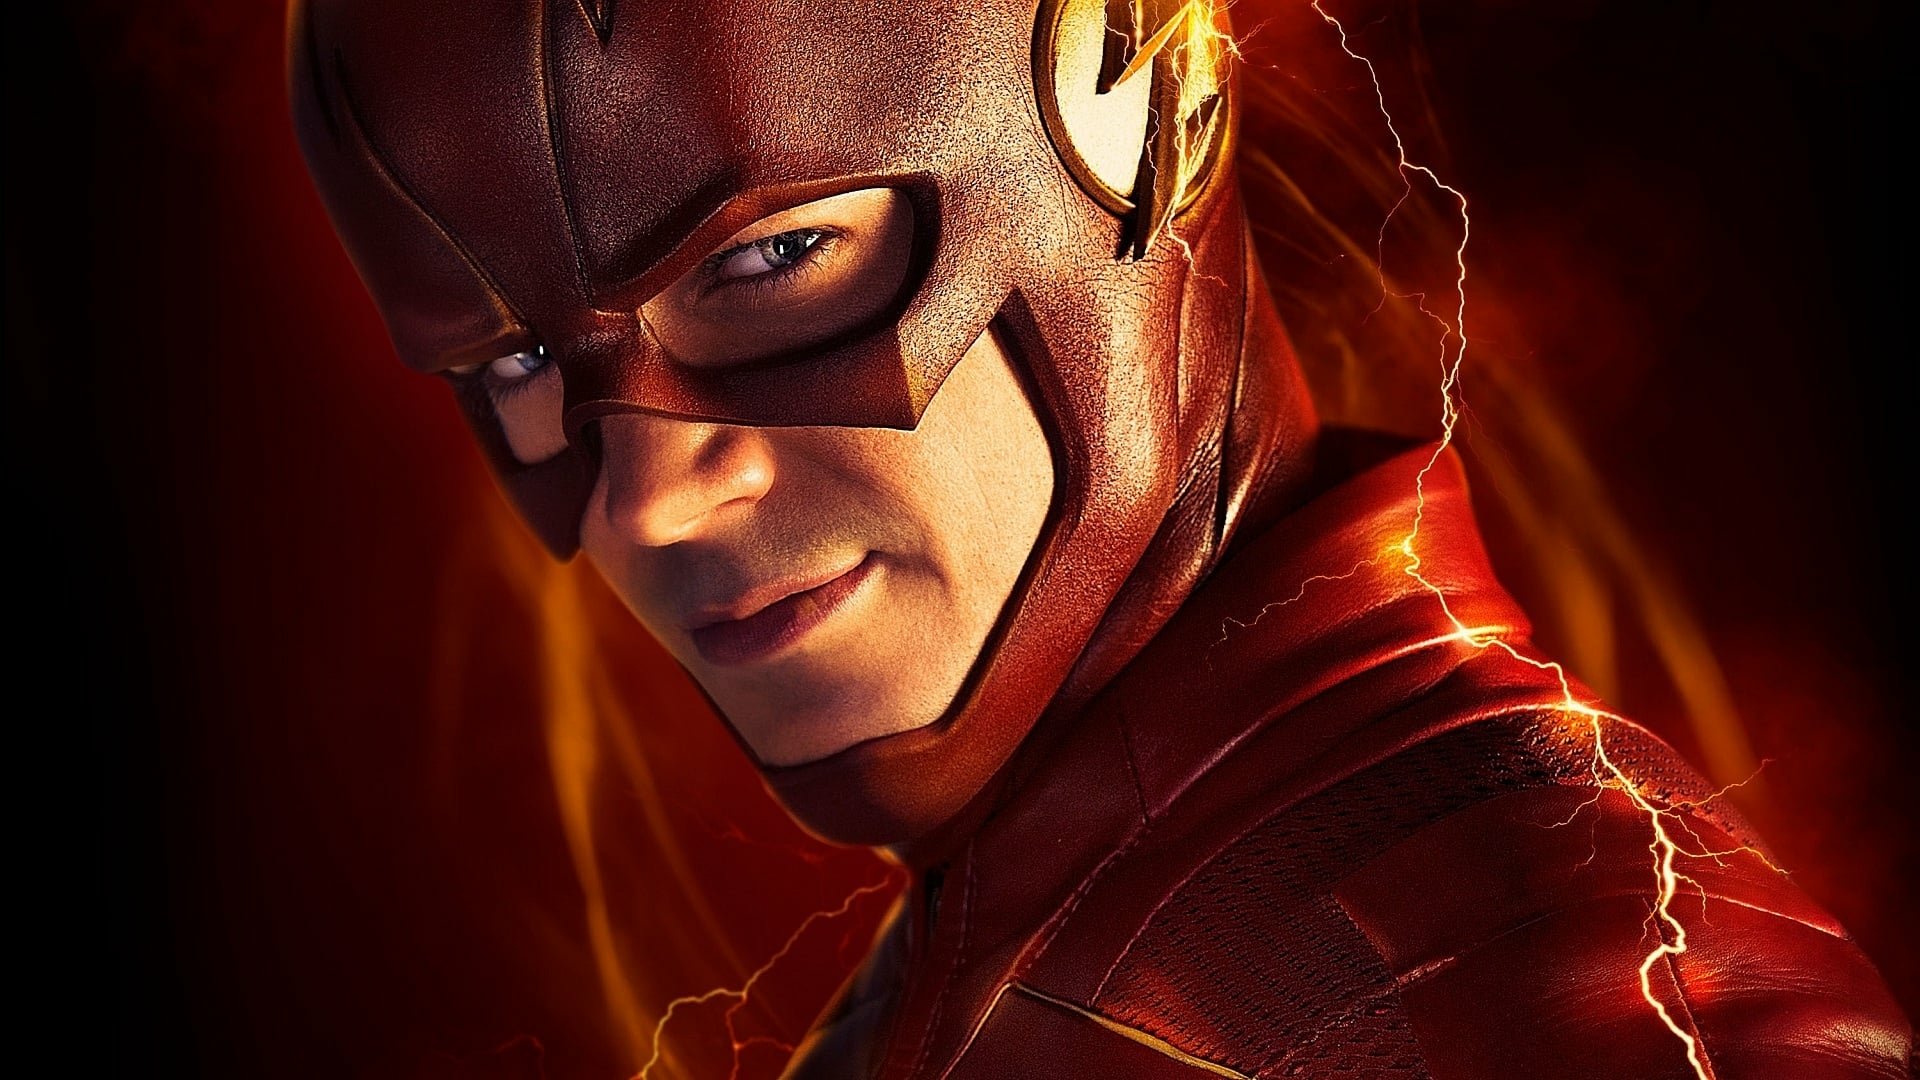 Download Grant Gustin Barry Allen Flash Tv Show The Flash 2014 Hd